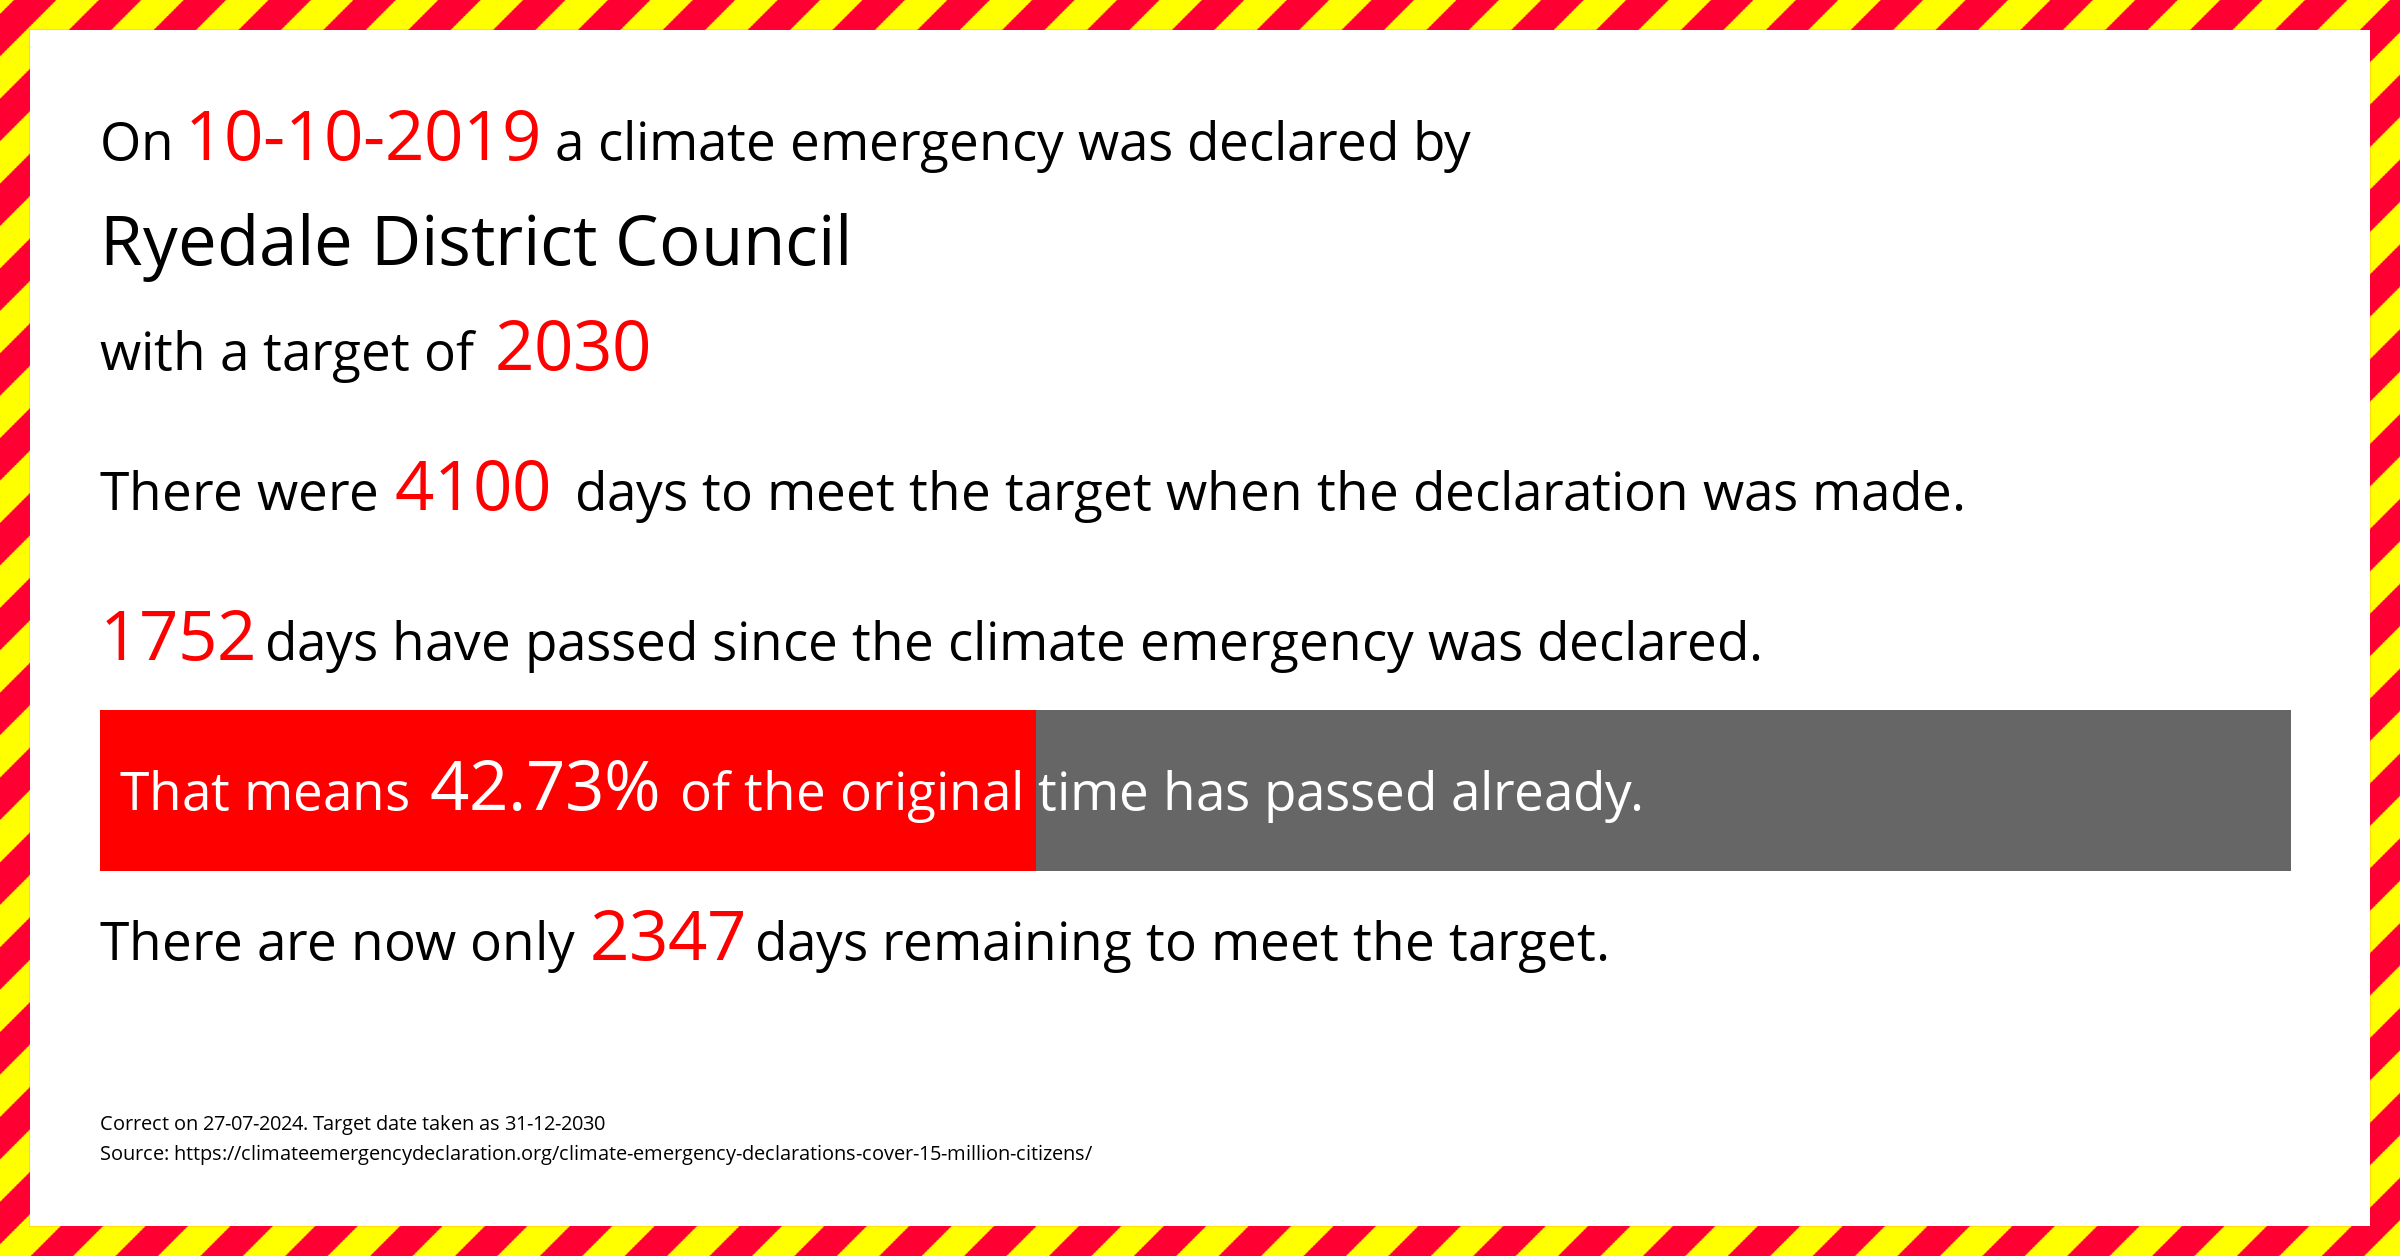 Ryedale District Council declared a Climate emergency on Thursday 10th October 2019, with a target of 2030.